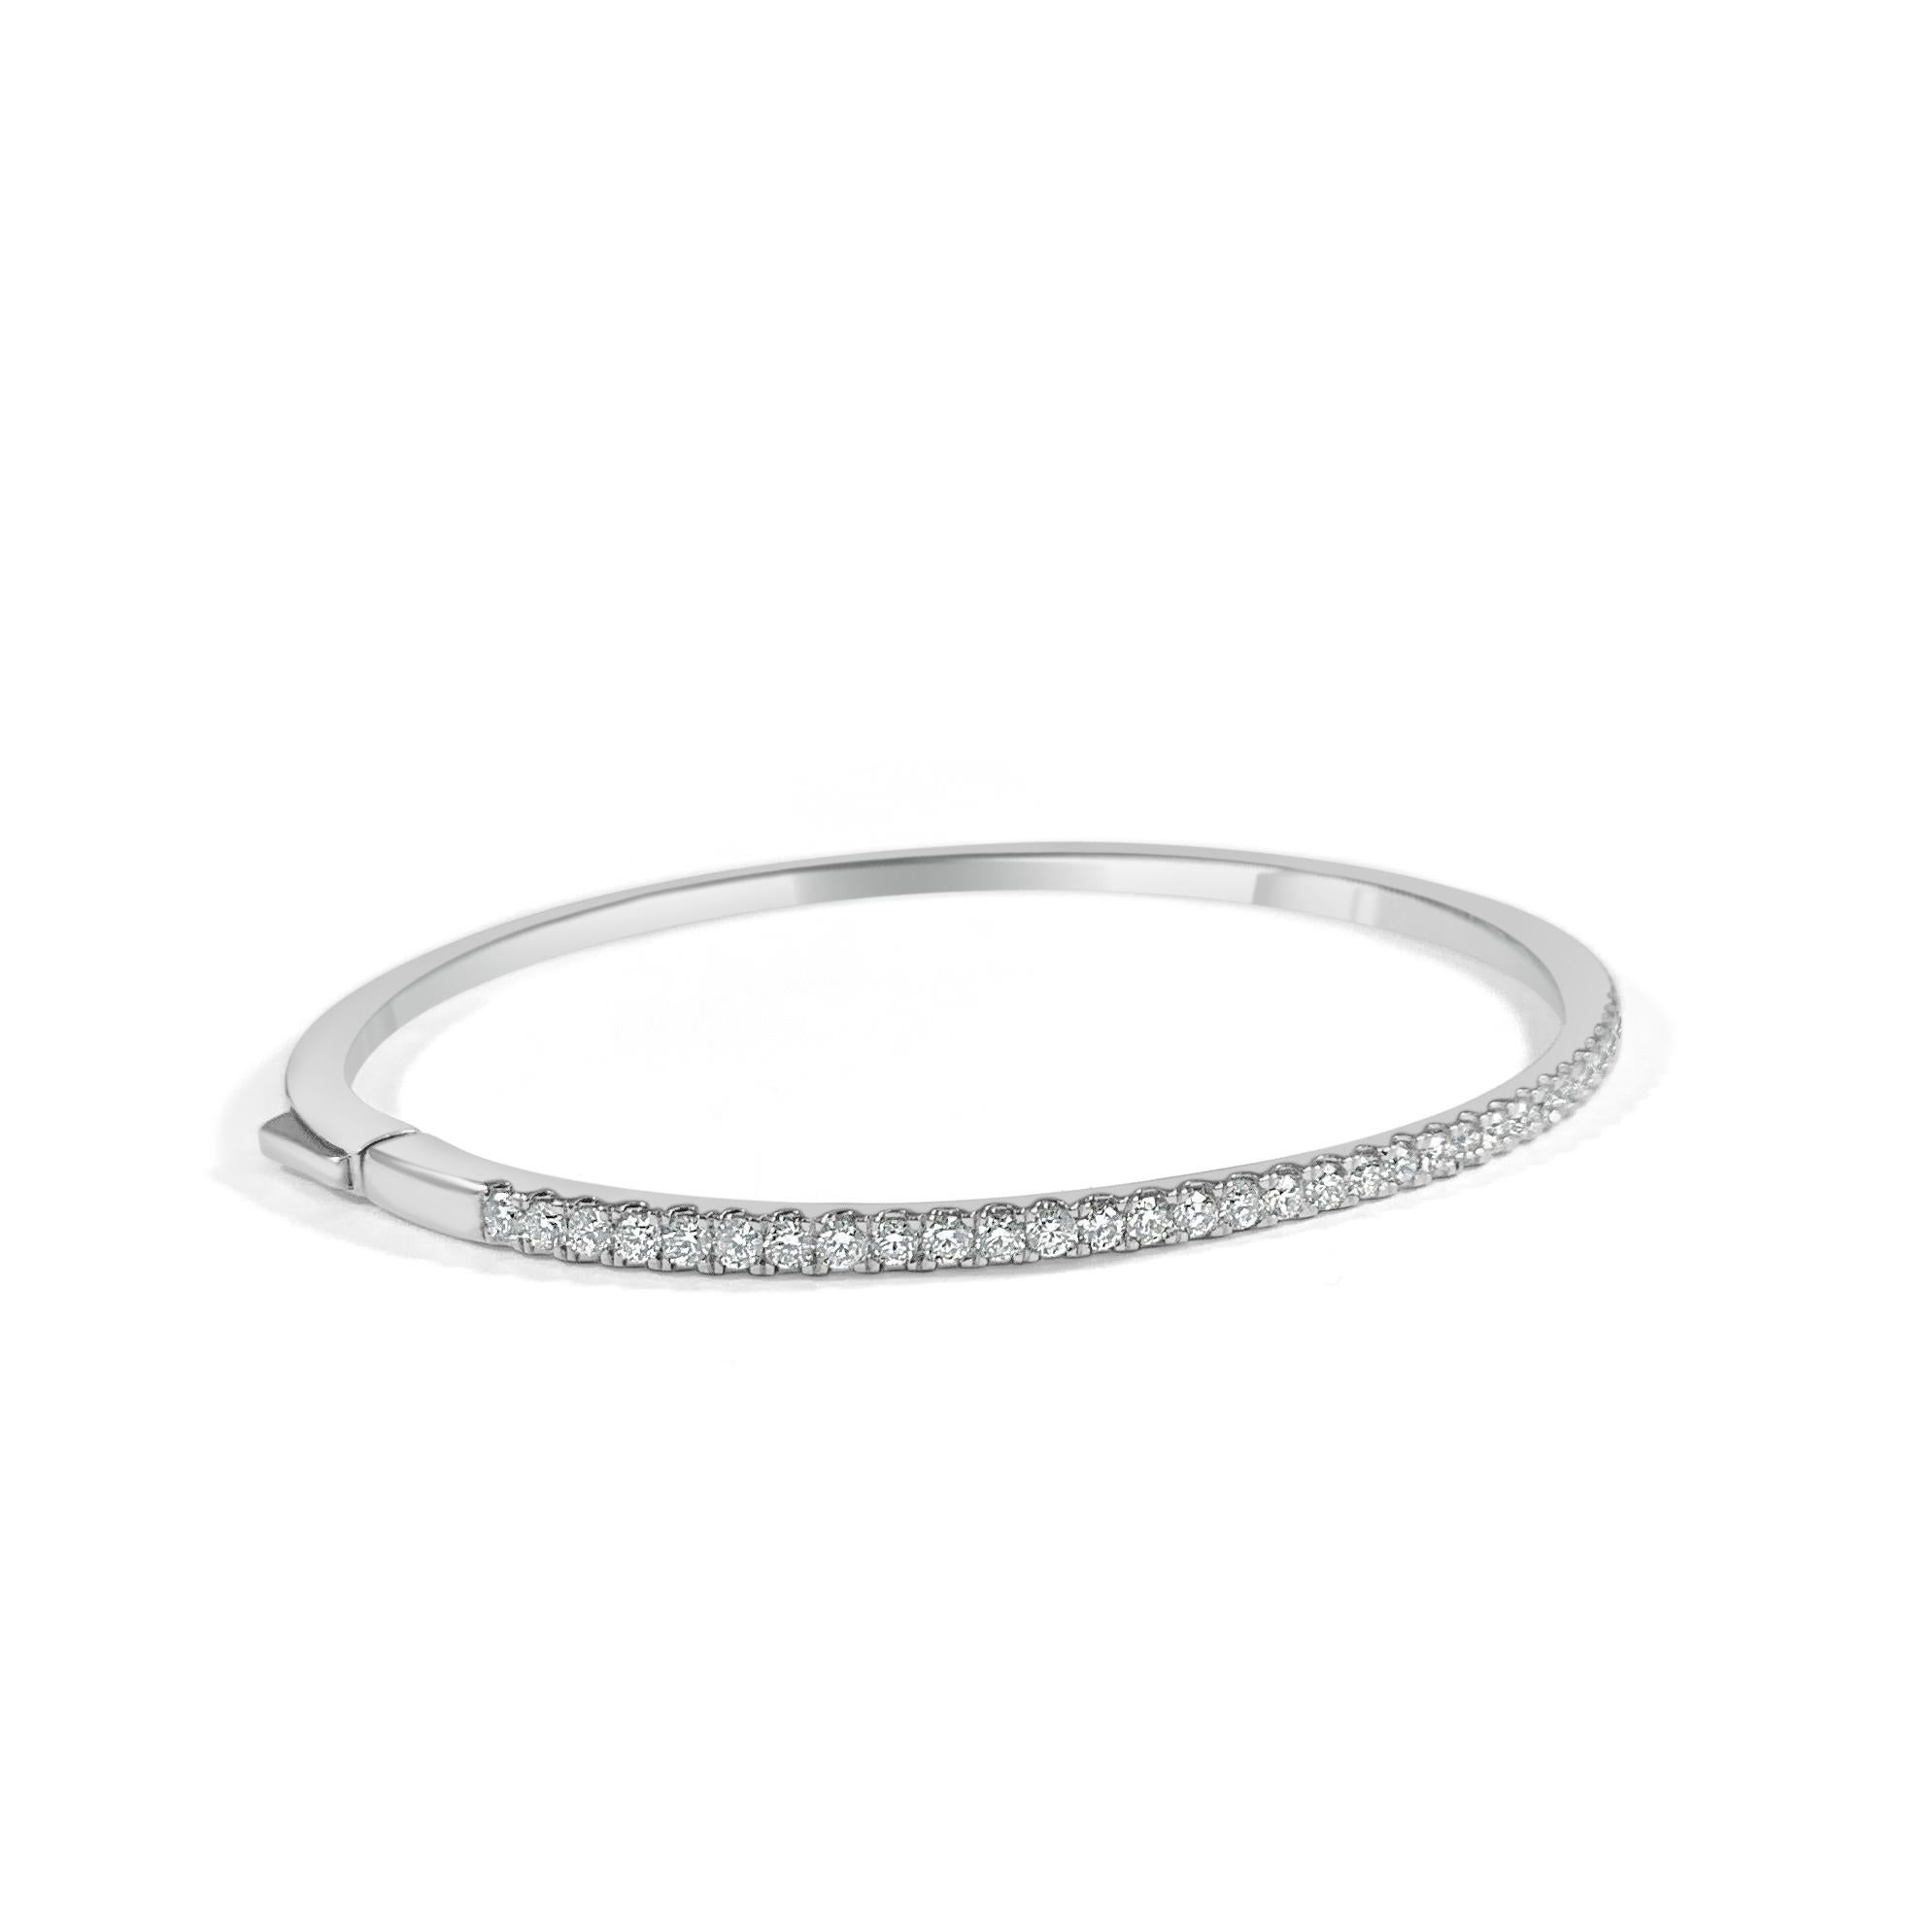 Are you looking to add some sophistication to your ensemble? This elegant diamond bangle for features a row of brilliant round diamonds set in 14k gold. Diamond Color and Clarity is GH SI1-SI2. 
-14K Gold
-1.00 ct. Natural White Diamonds
-Diamond